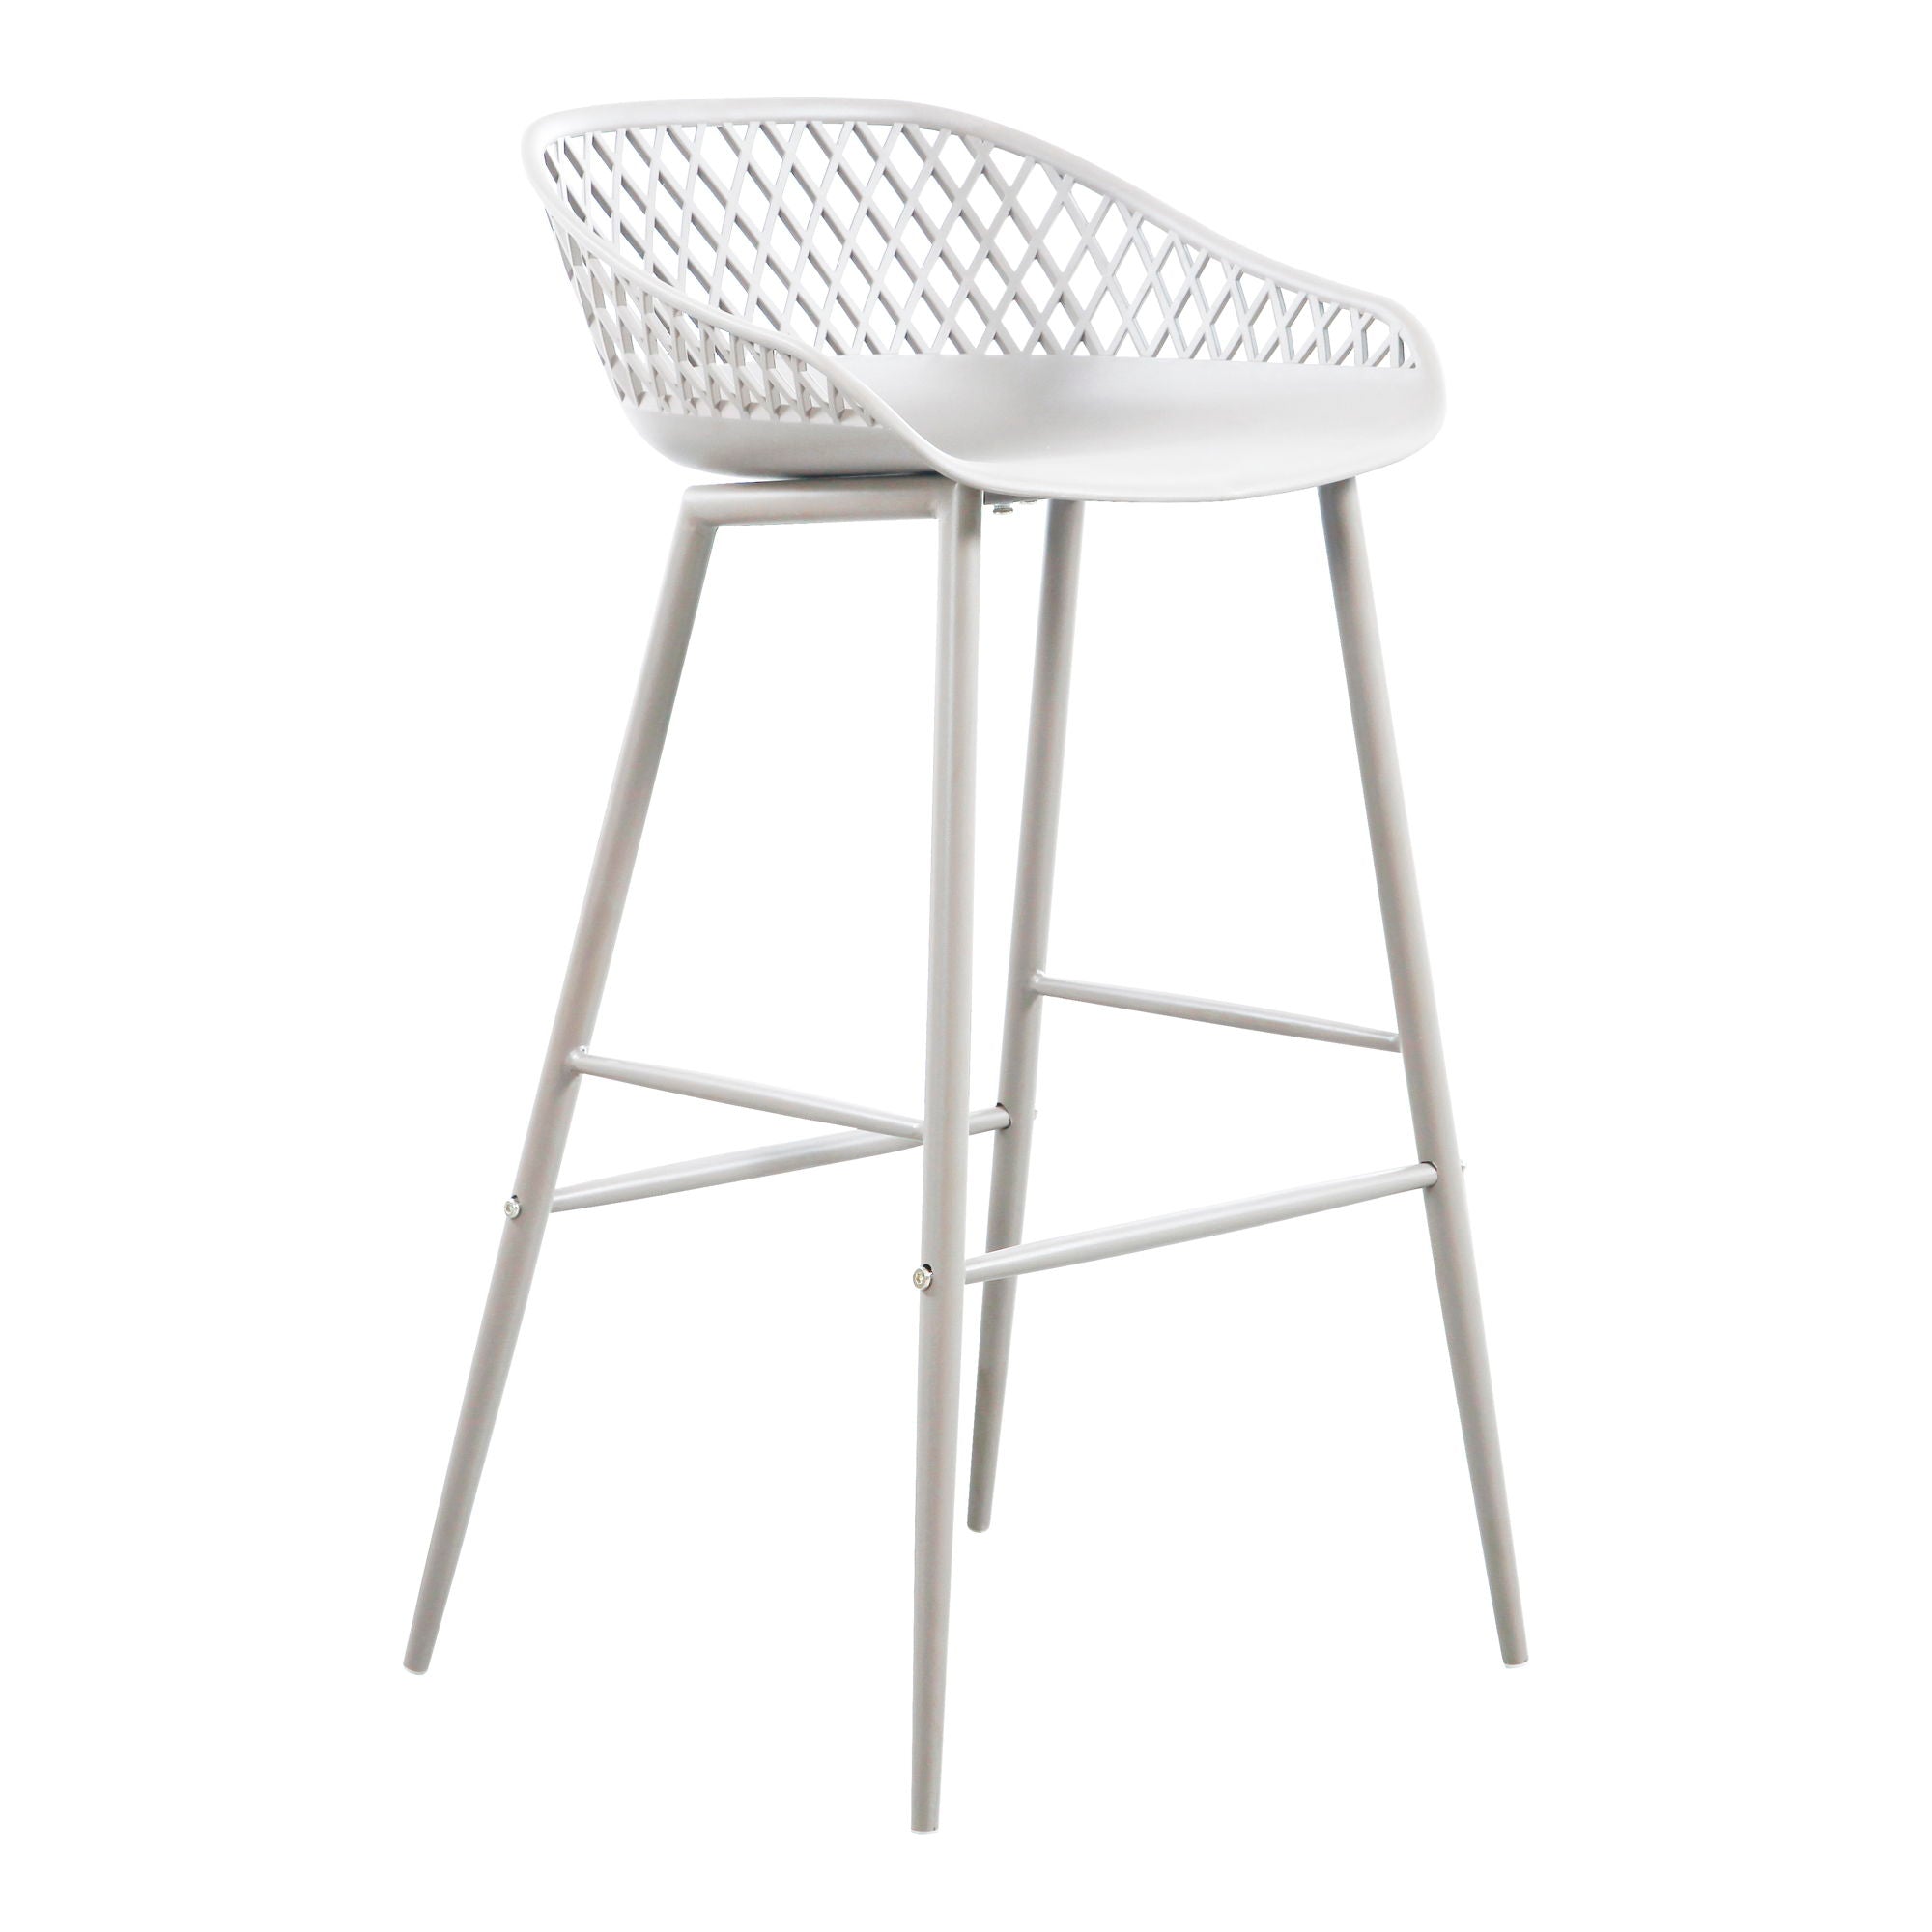 Piazza - Outdoor Barstool - White - M2